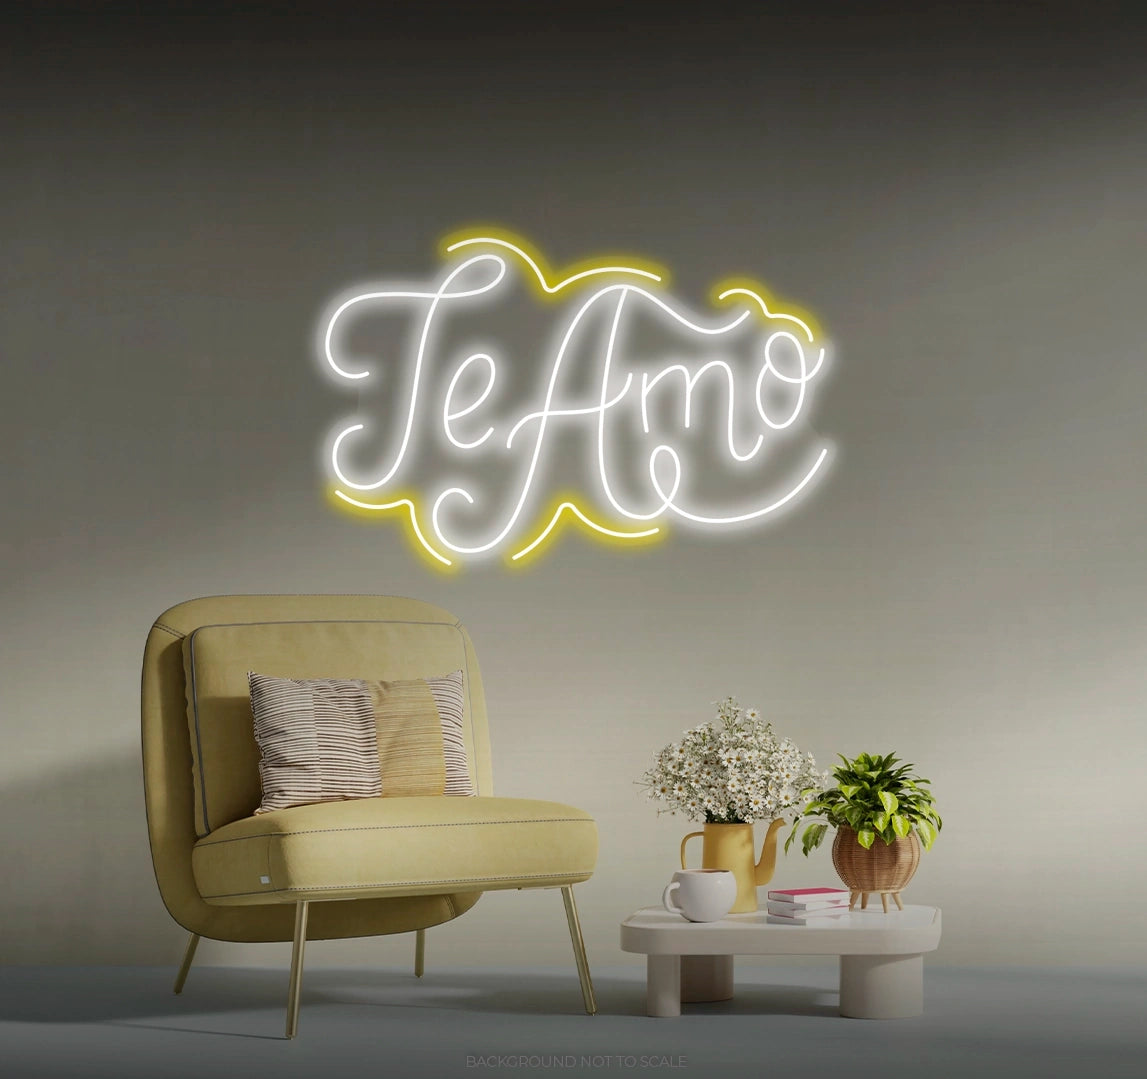 Te amo cutted frame LED neon